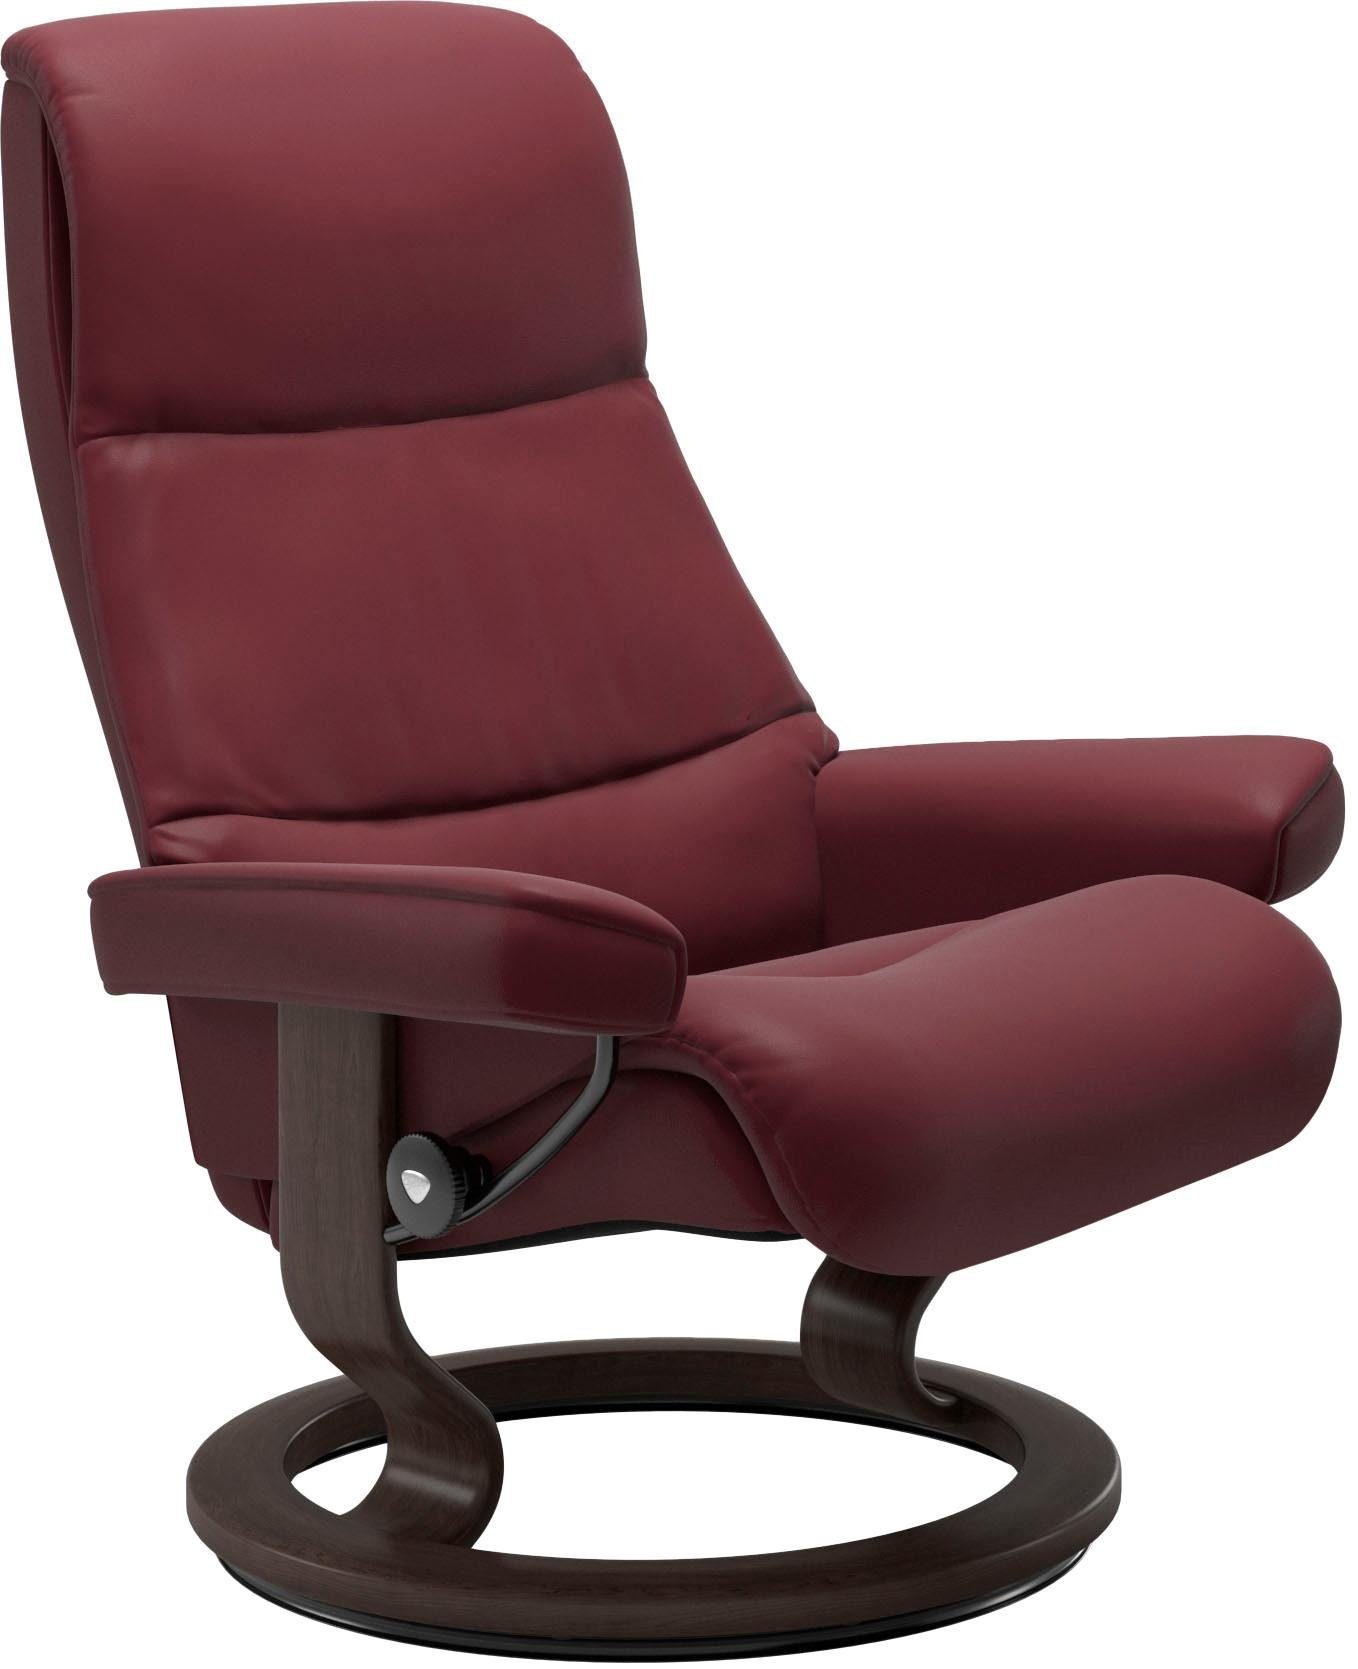 Classic Größe View, Wenge S,Gestell mit Base, Stressless® Relaxsessel